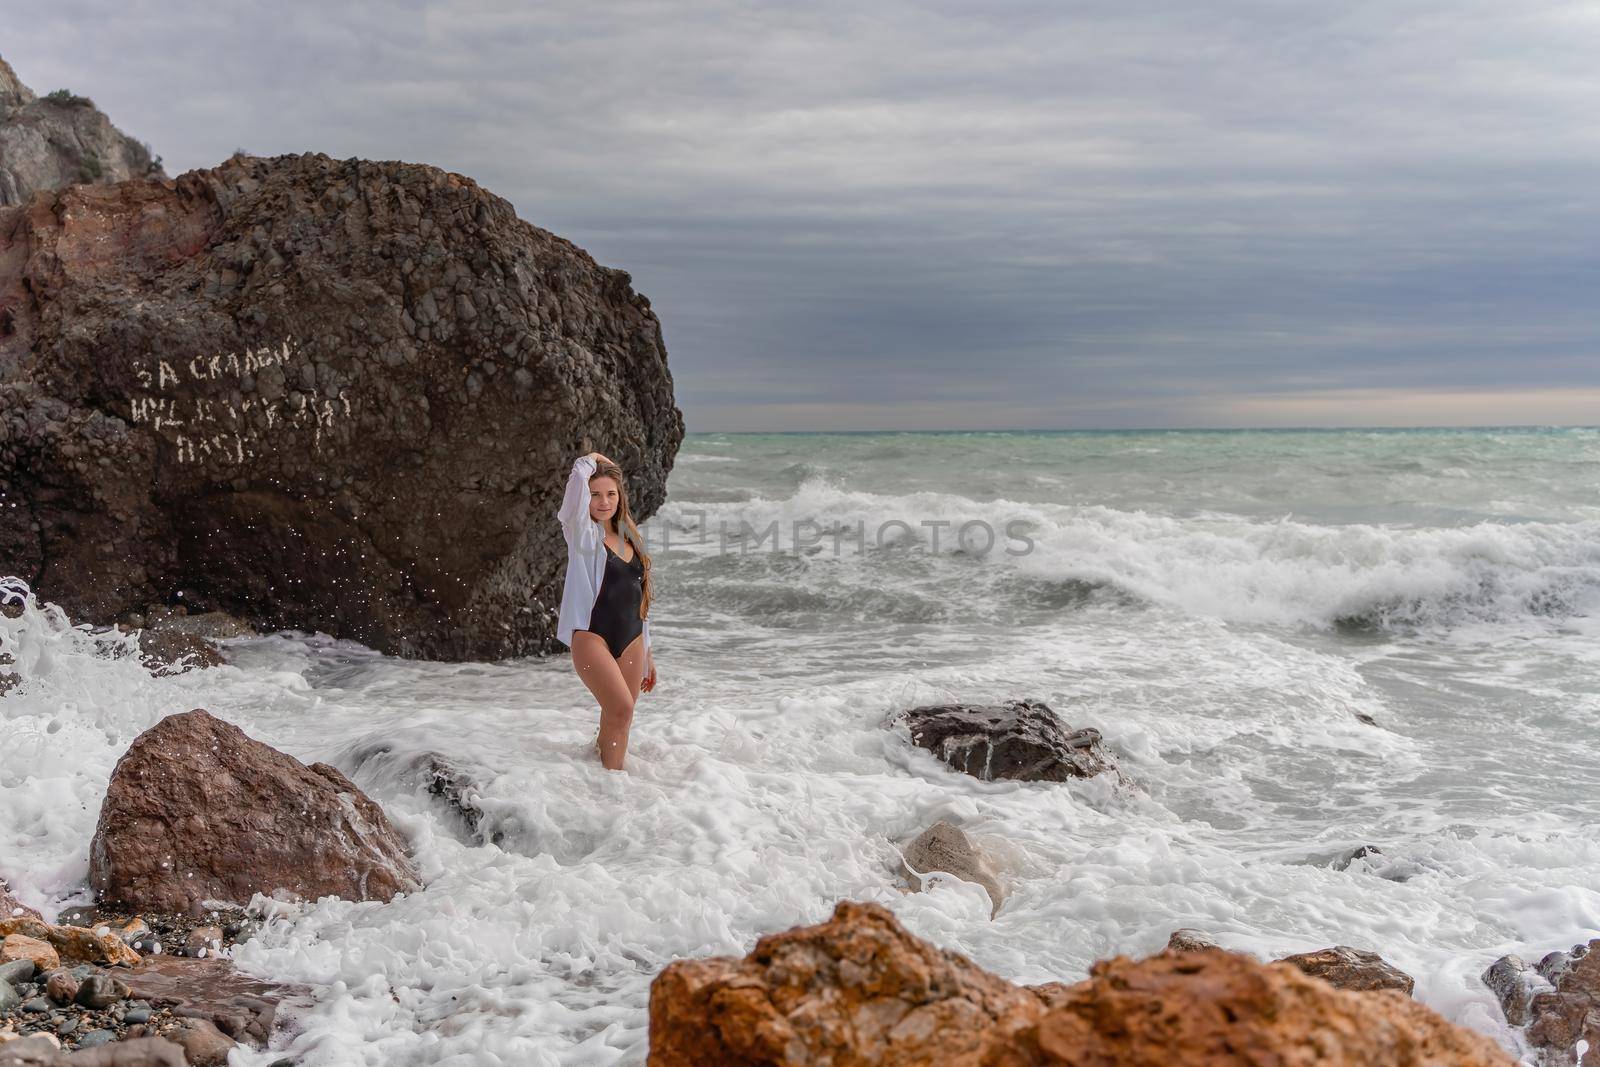 A beautiful girl in a black dress is walking on the waves, big waves with white foam. A cloudy stormy day at sea, with clouds and big waves hitting the rocks